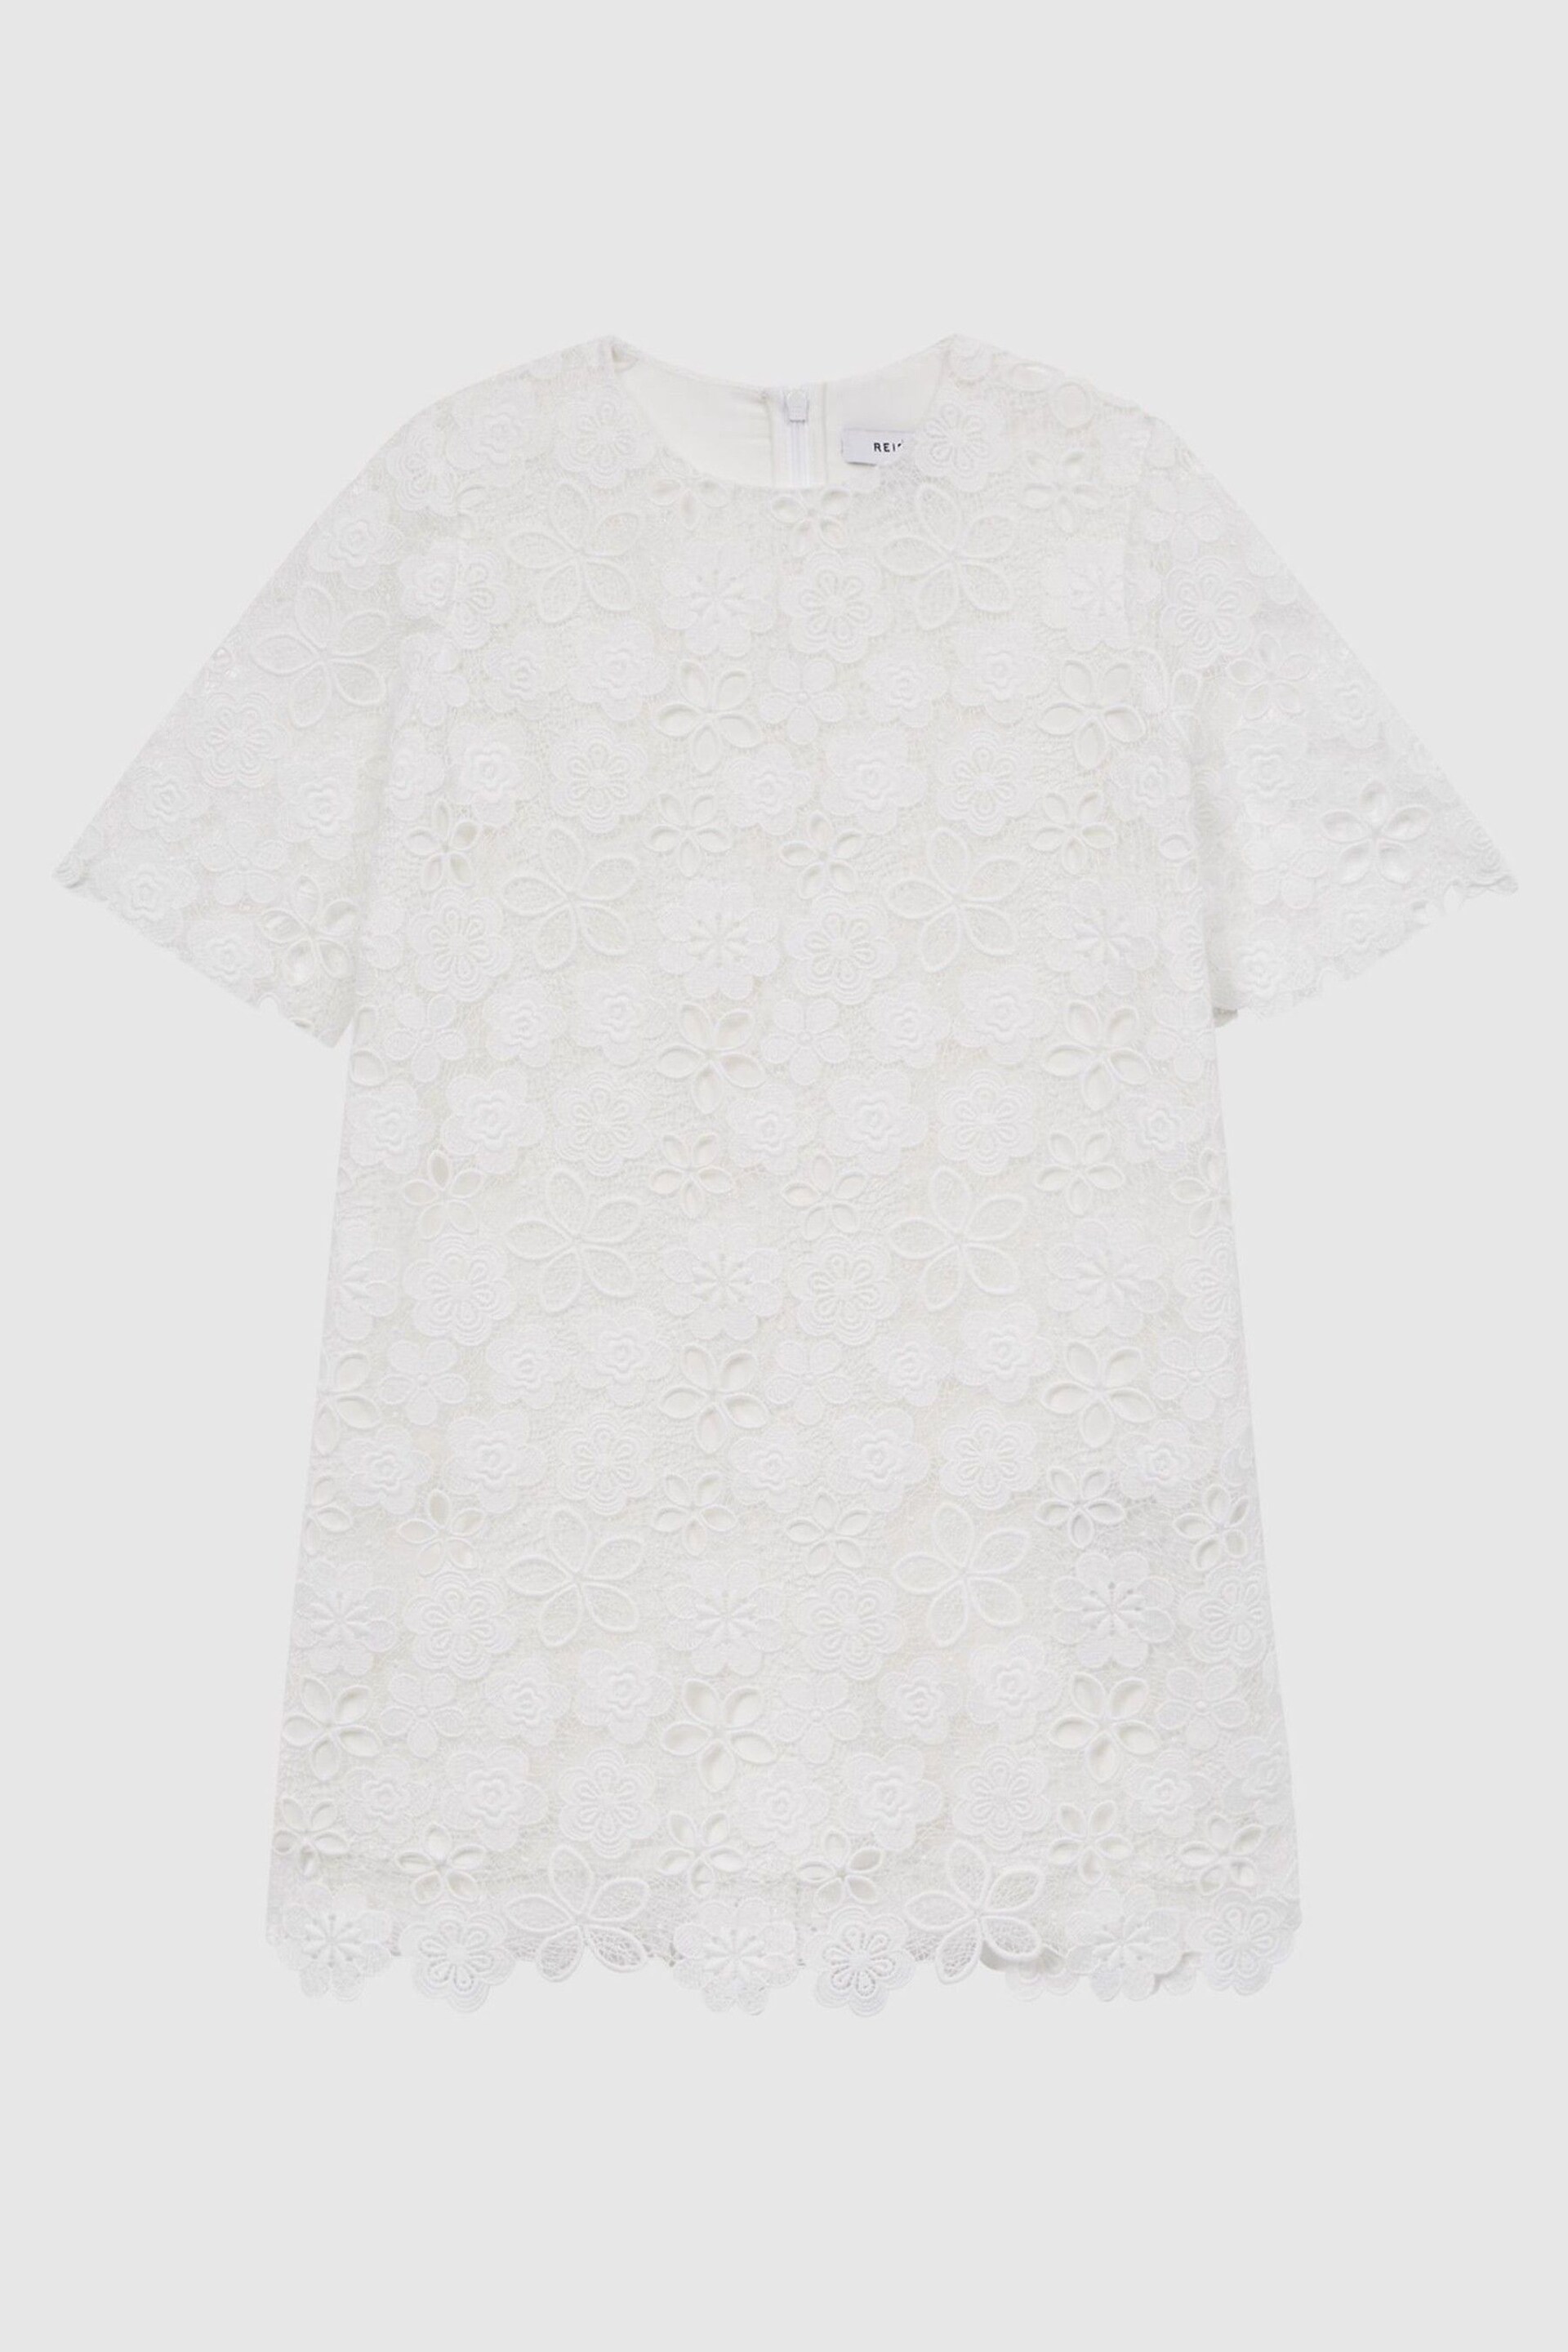 Reiss Ivory Susie Junior Lace T-Shirt Dress - Image 2 of 7